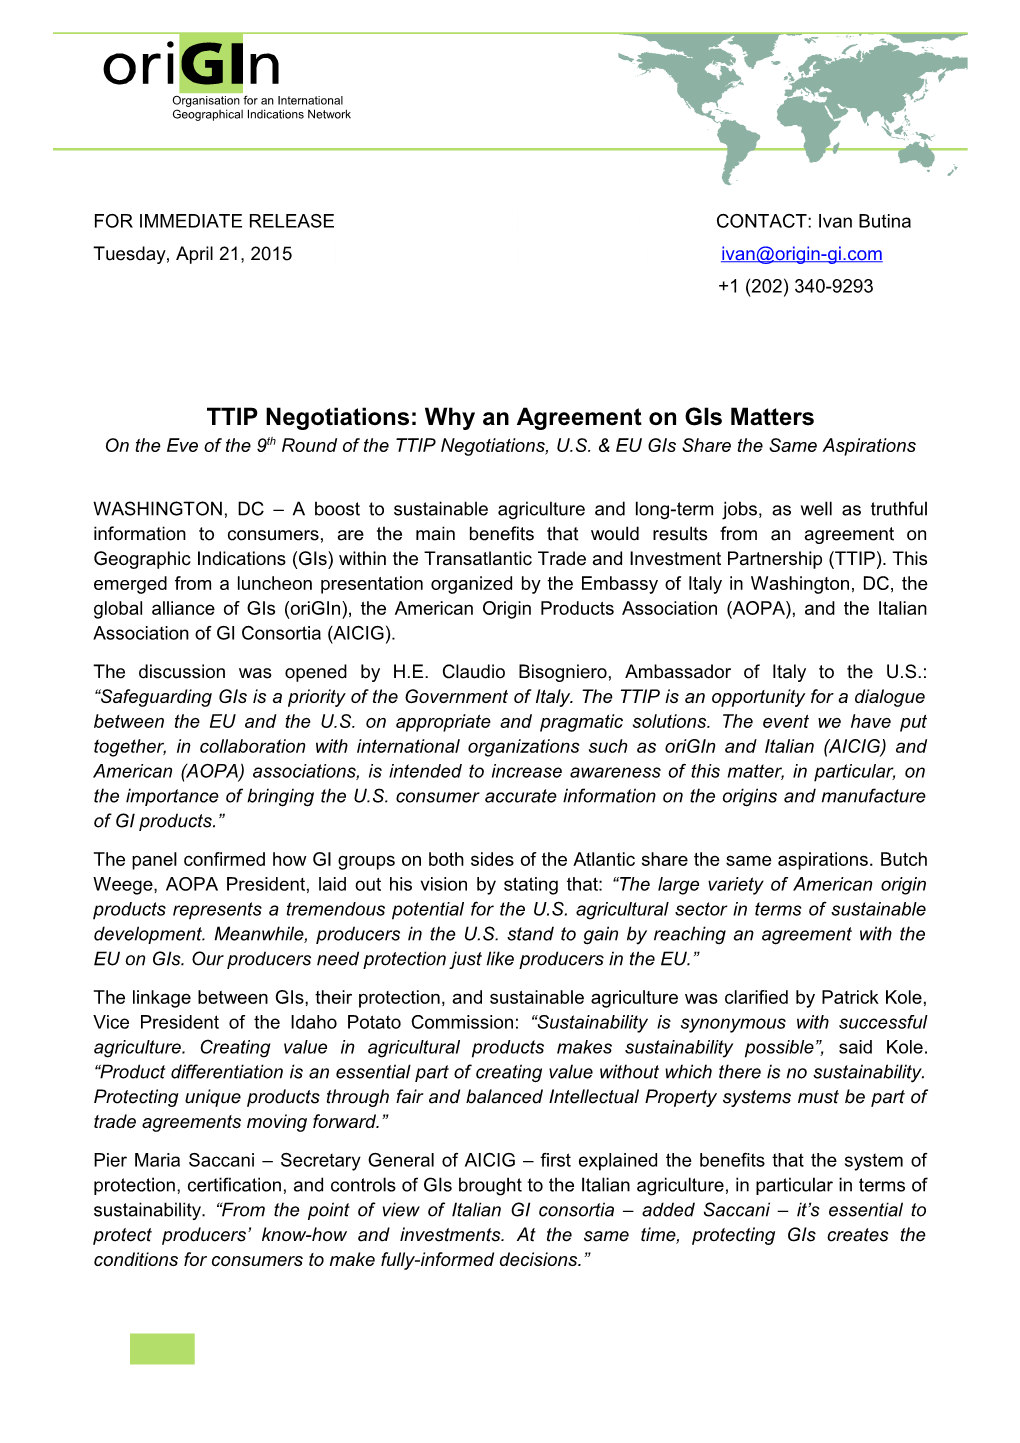 TTIP Negotiations: Why an Agreement on Gis Matters